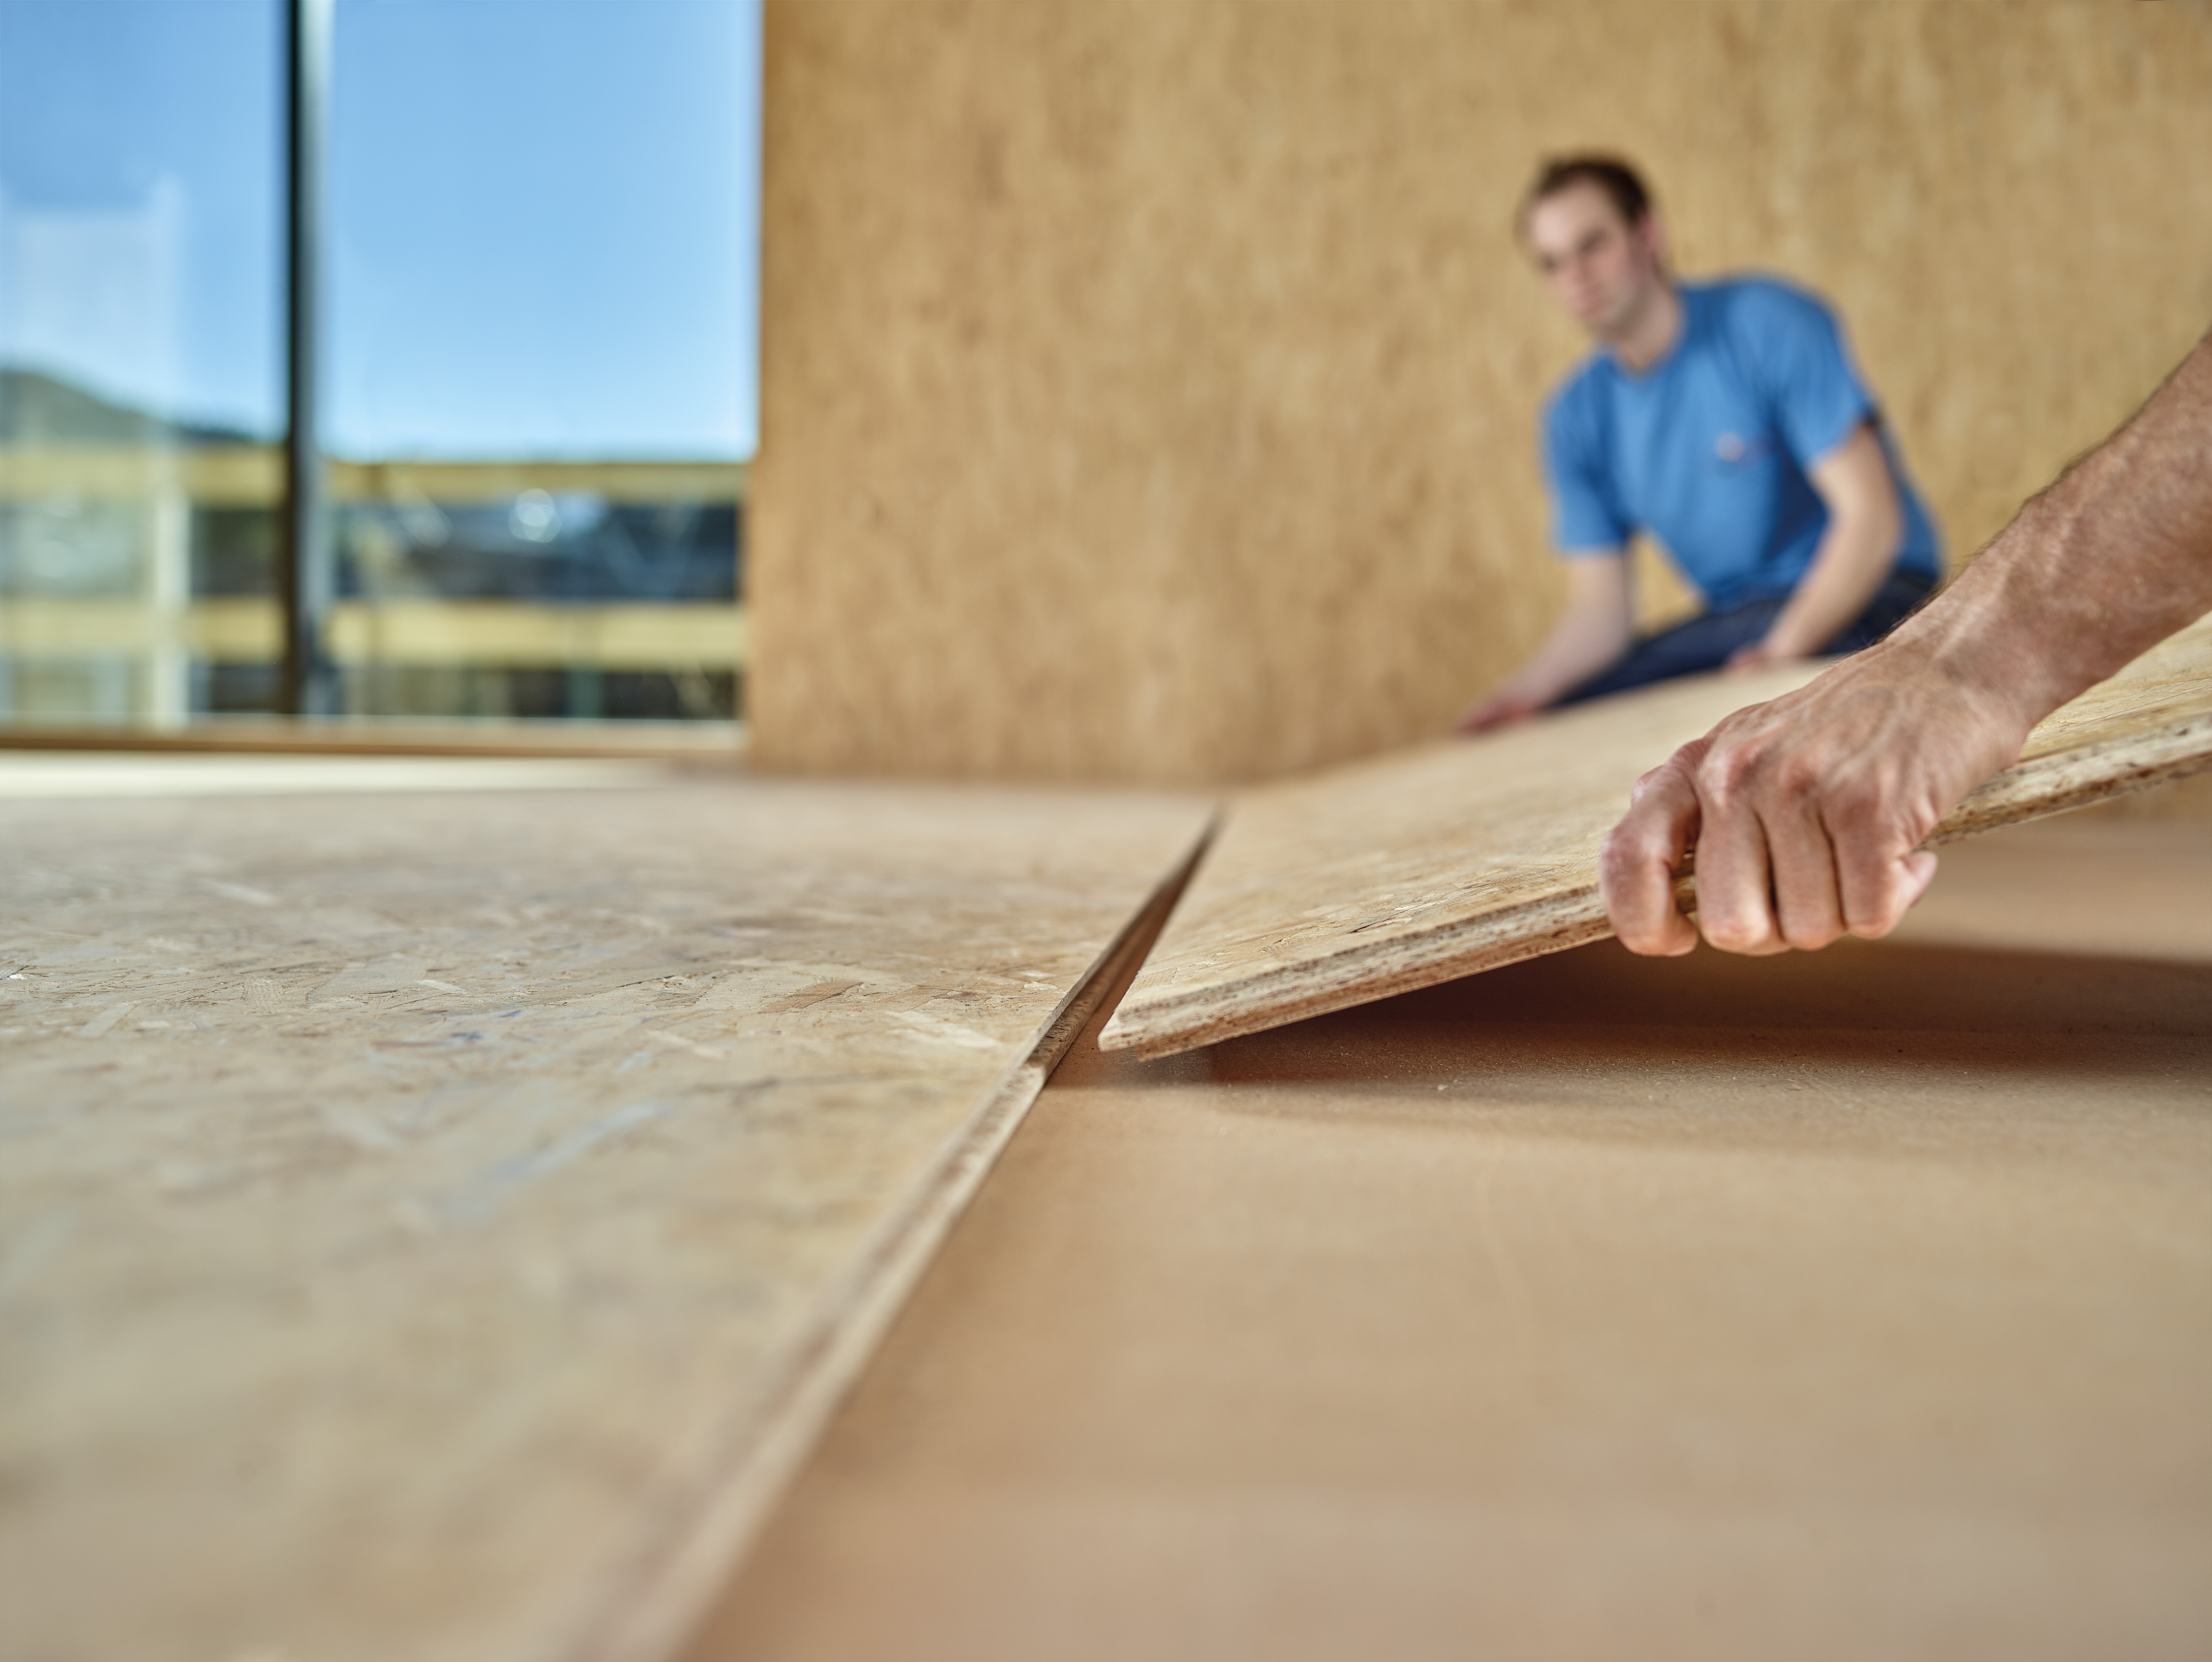 OSB 3 tongue and groove – installed quickly and easily